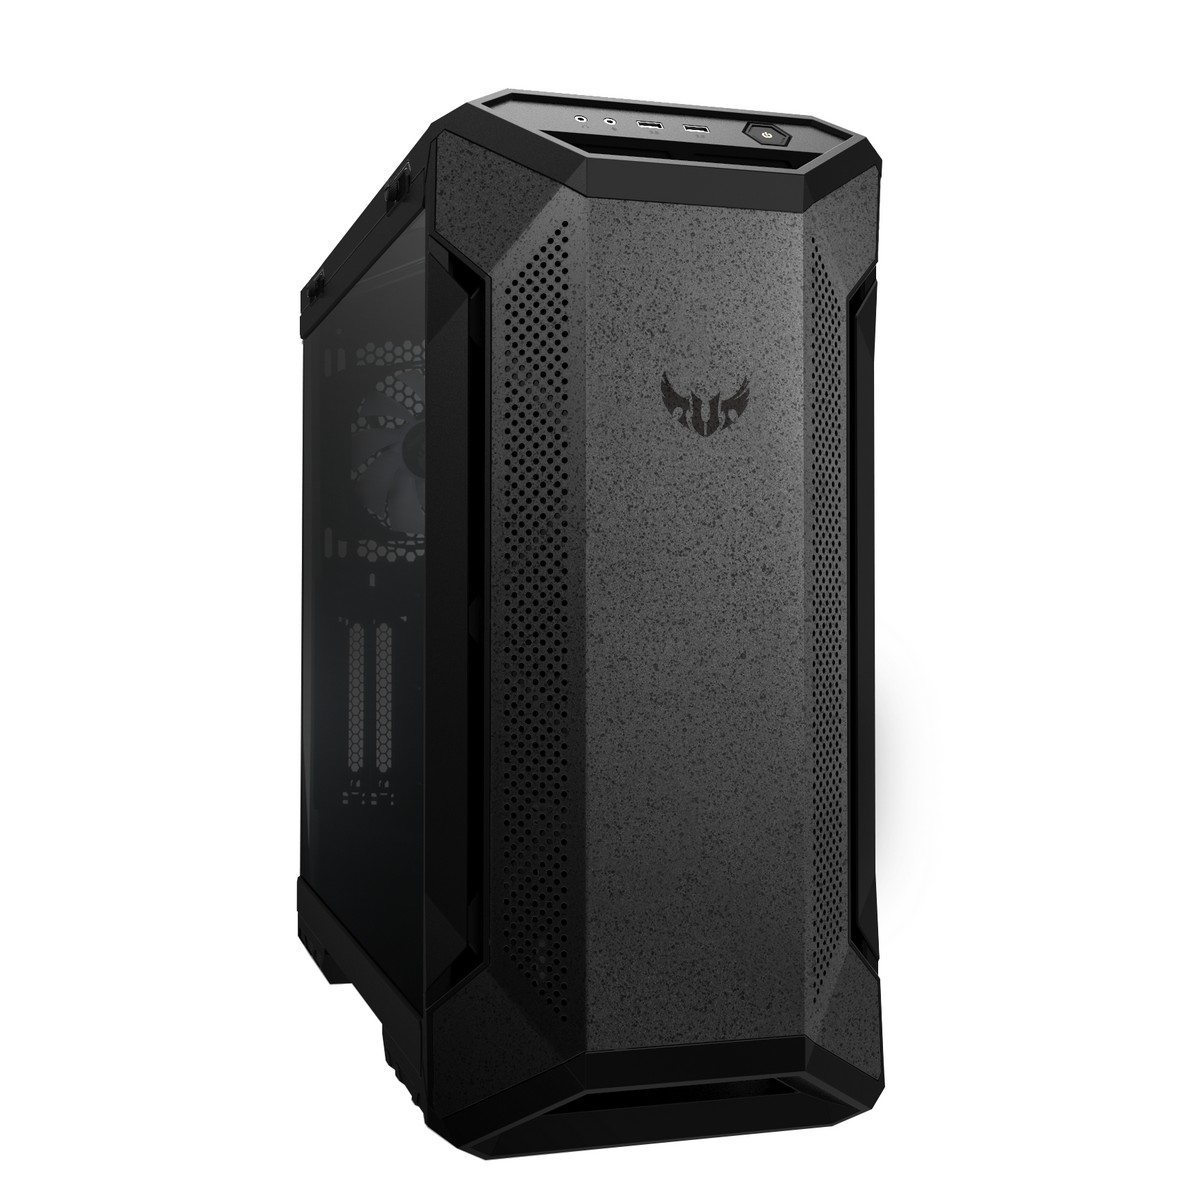 ASUS TUF Gaming GT501 Midi-Tower Case - Black Tempered Glass